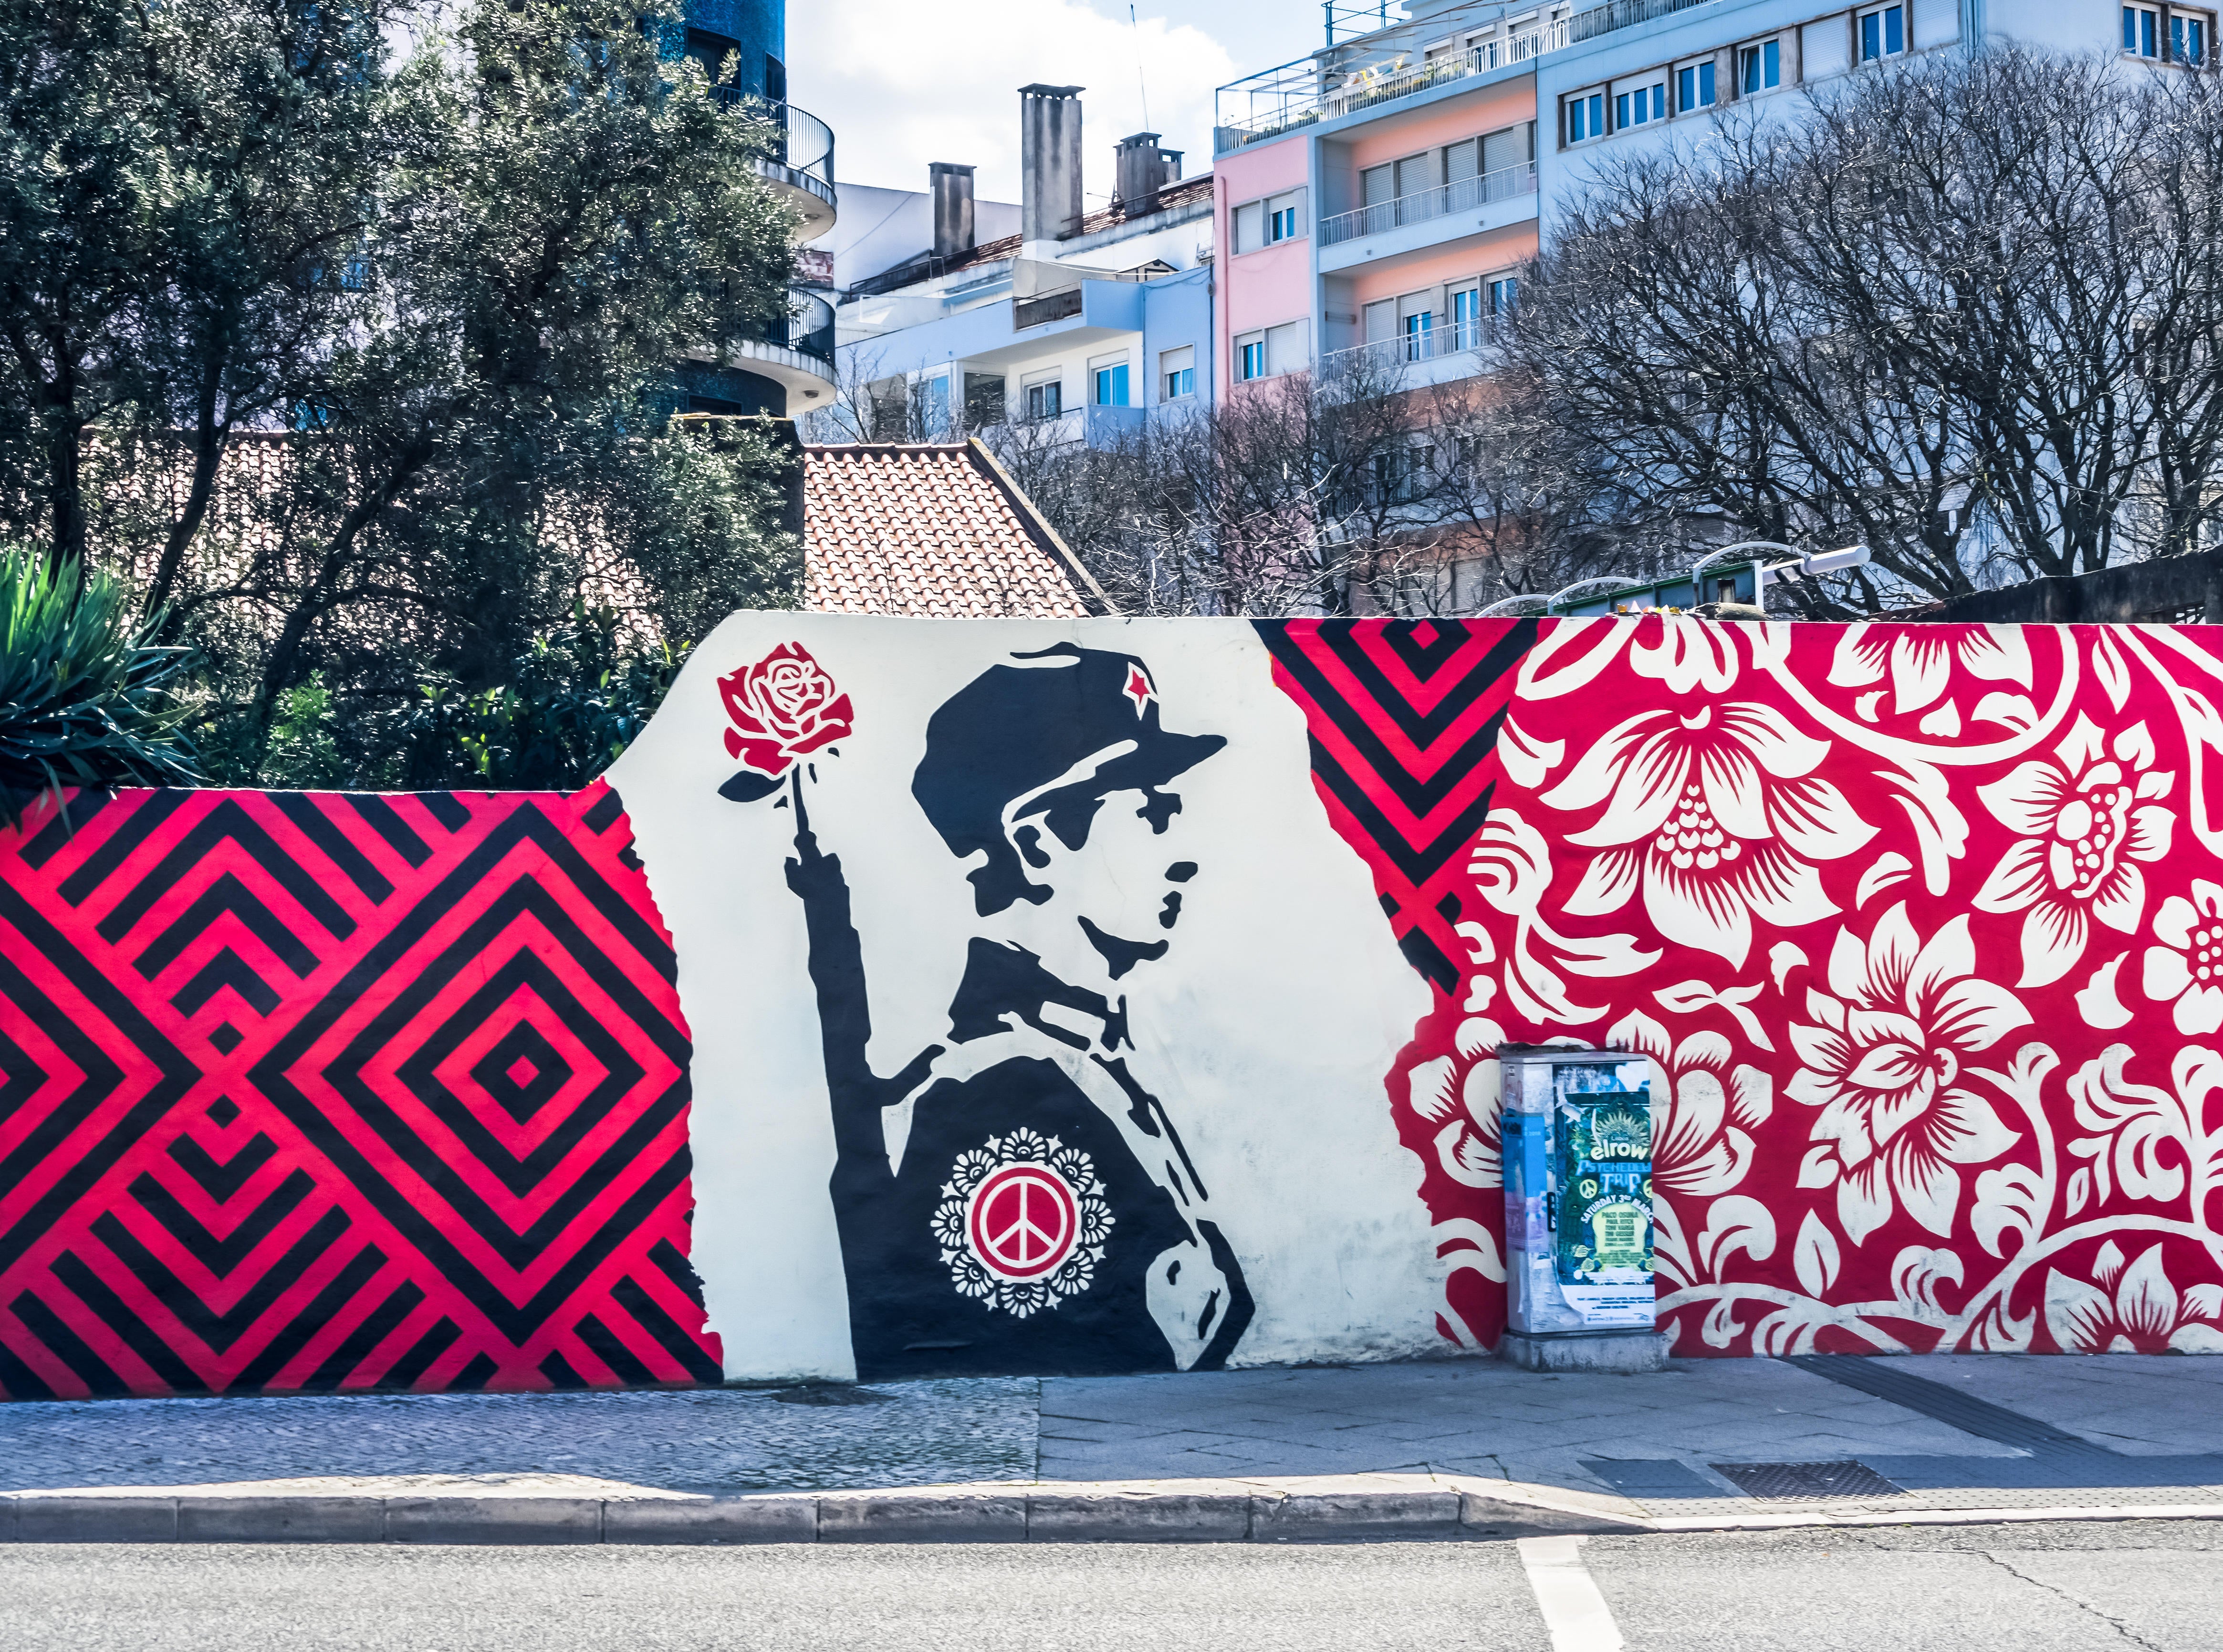 Flower power: a mural in the city commemorates the 1974 revolution